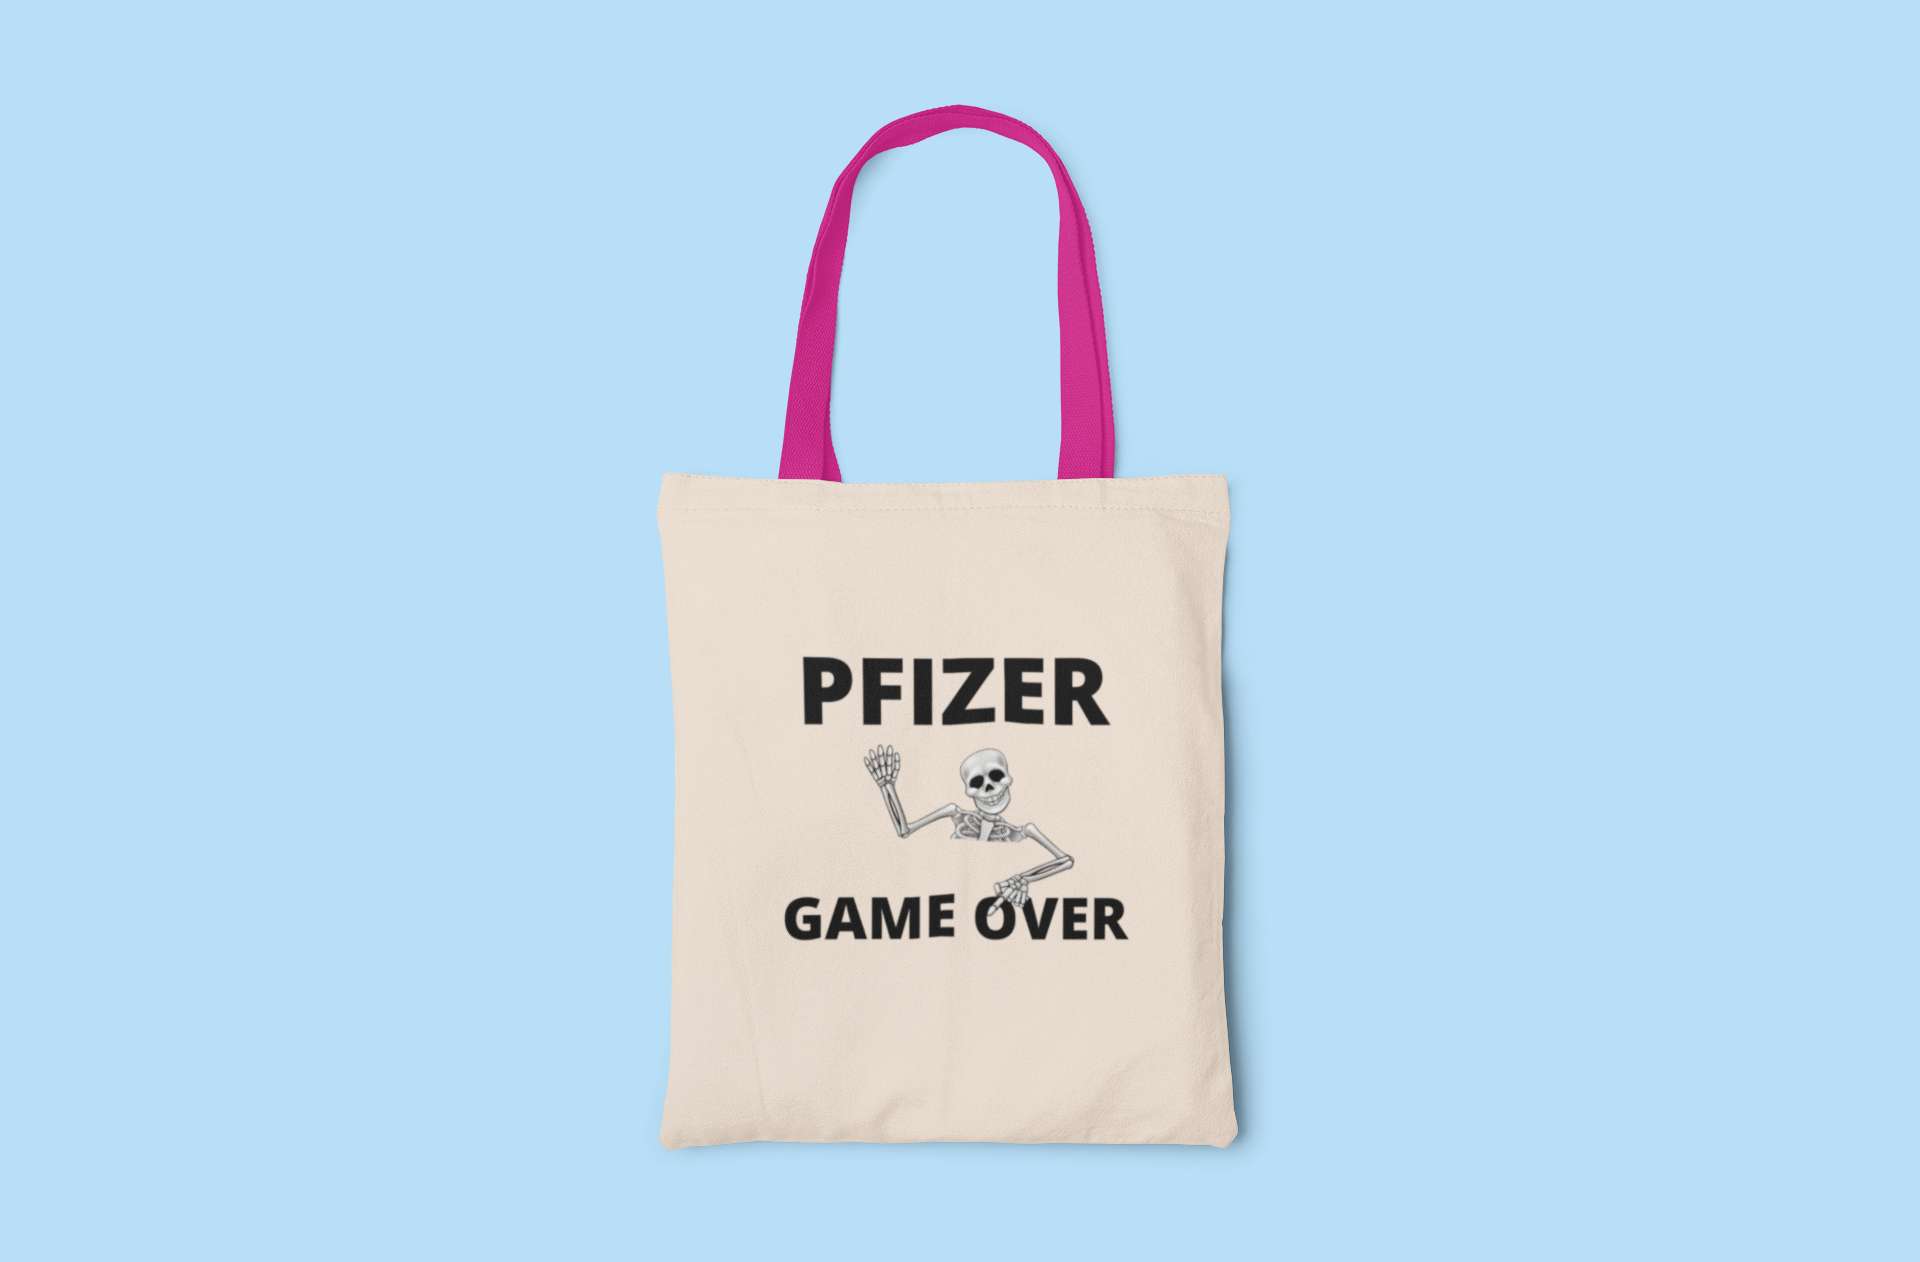 Pfizer Game Over Tote Bag